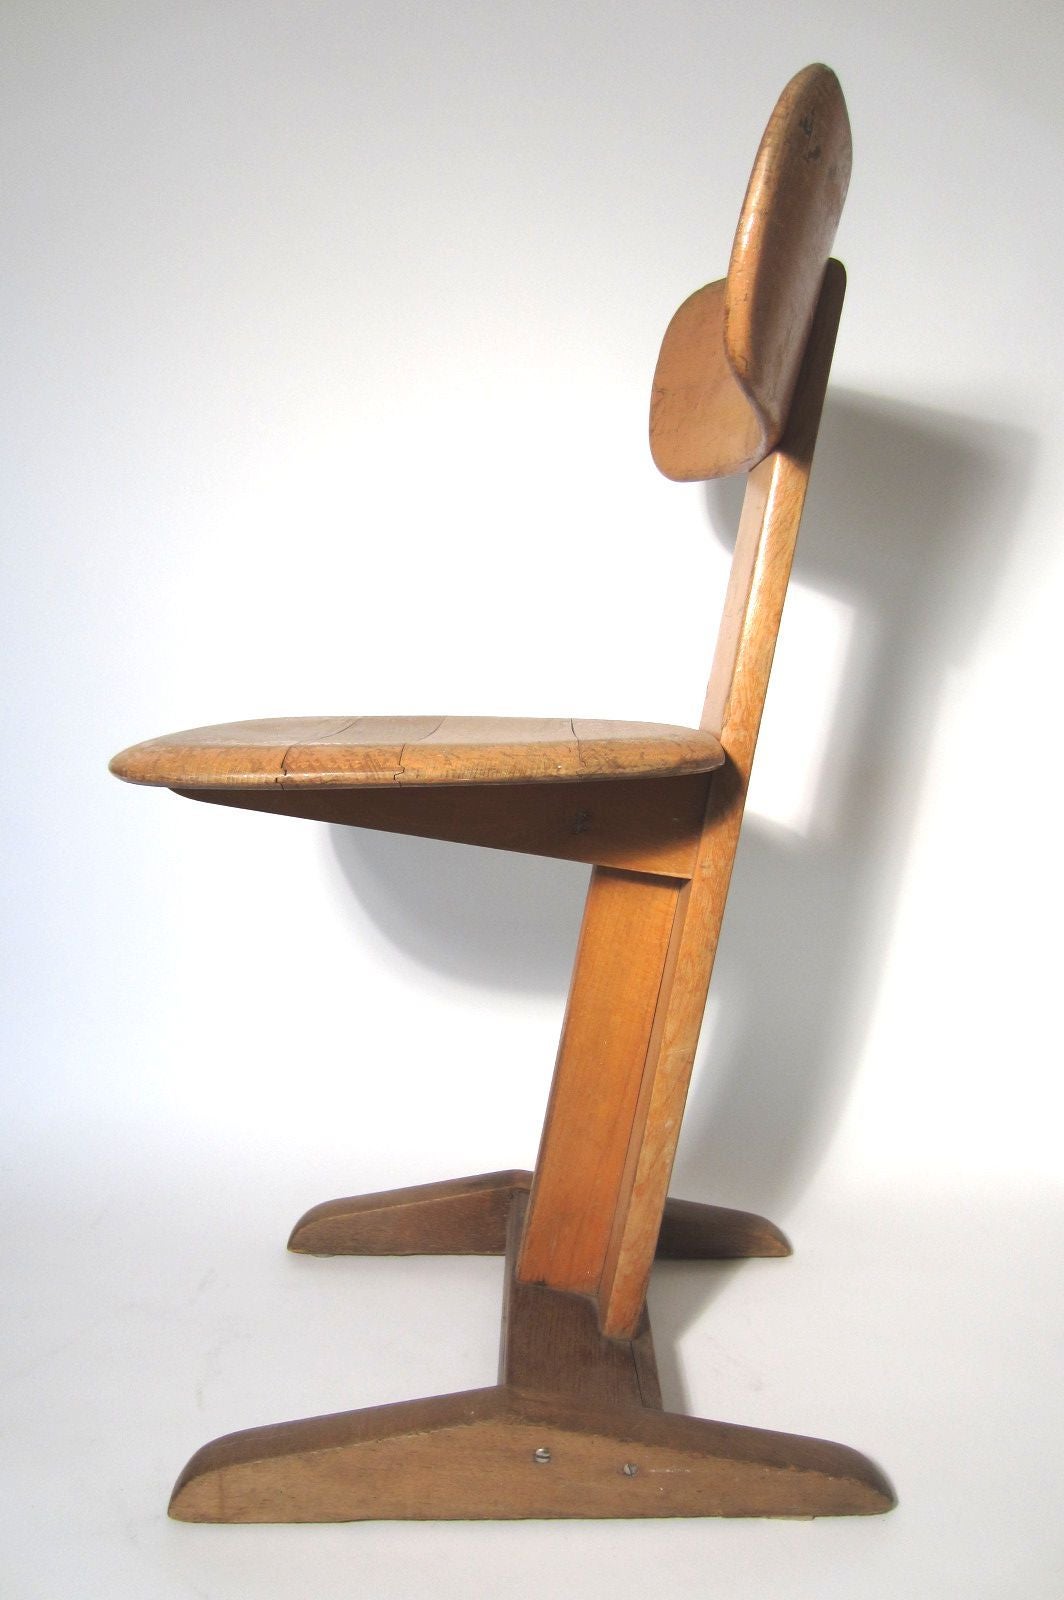 Ultra rare, museum piece. 
Bauhaus era desk chair from Germany. 
Signed as pictured with ink stamp on bottom of seat. 
For any additional pictures please feel free to ask.